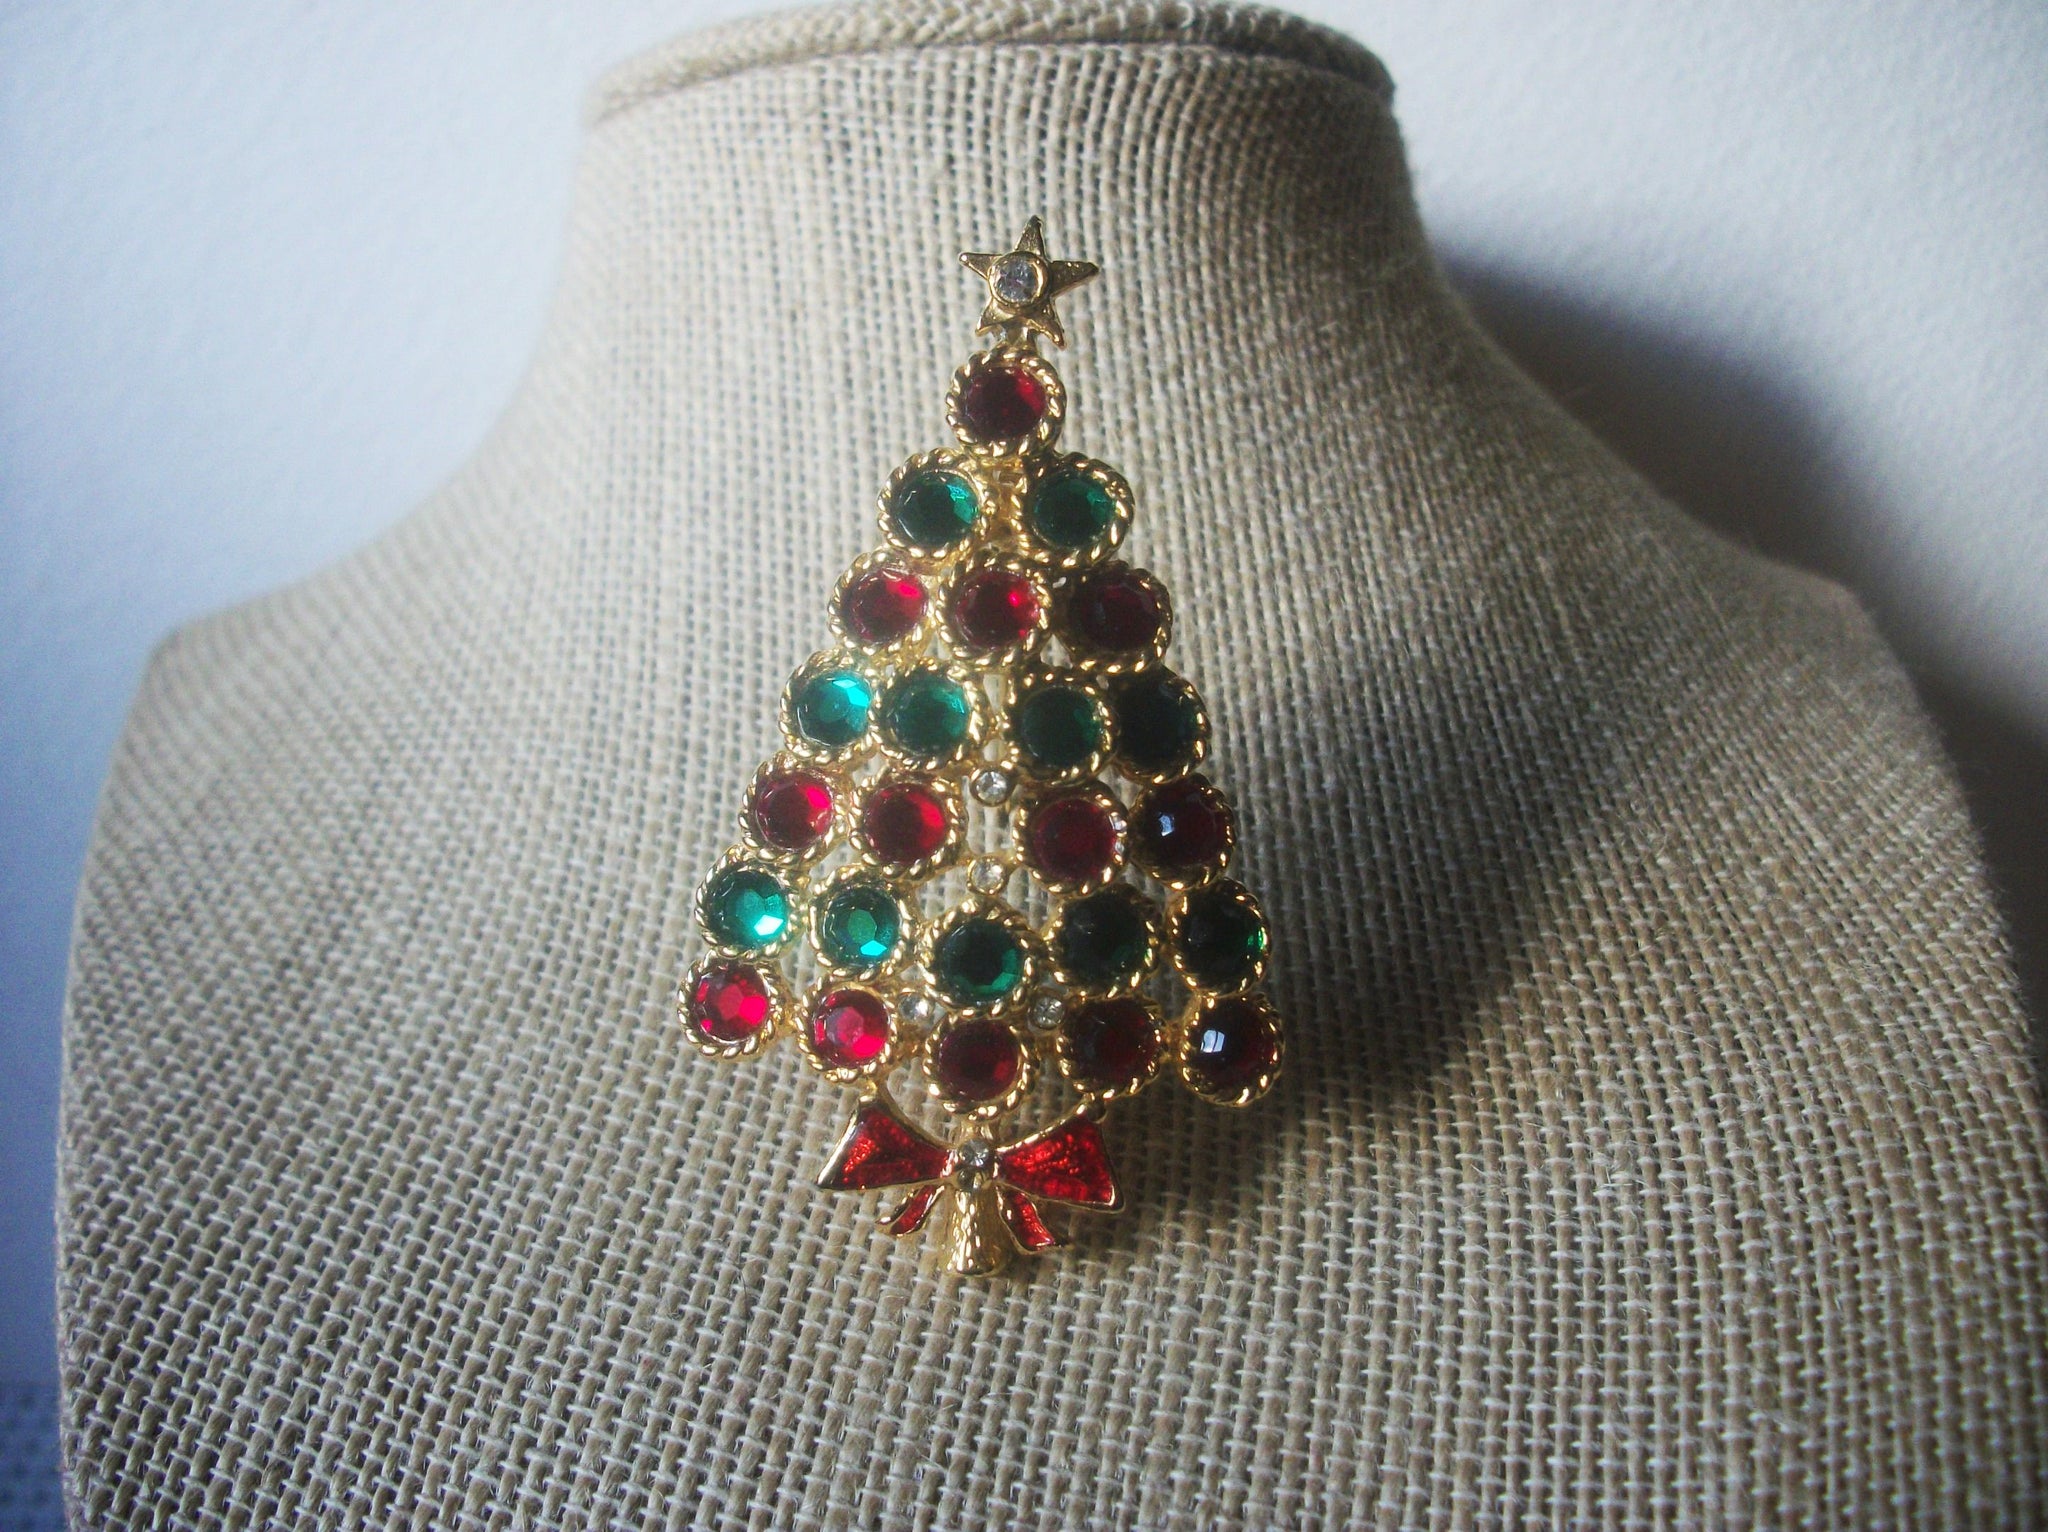 Larger Vintage Jewelry Christmas Tree, Red Green Crystal, Rhinestones, Gold Tone, Brooch Pin 53018